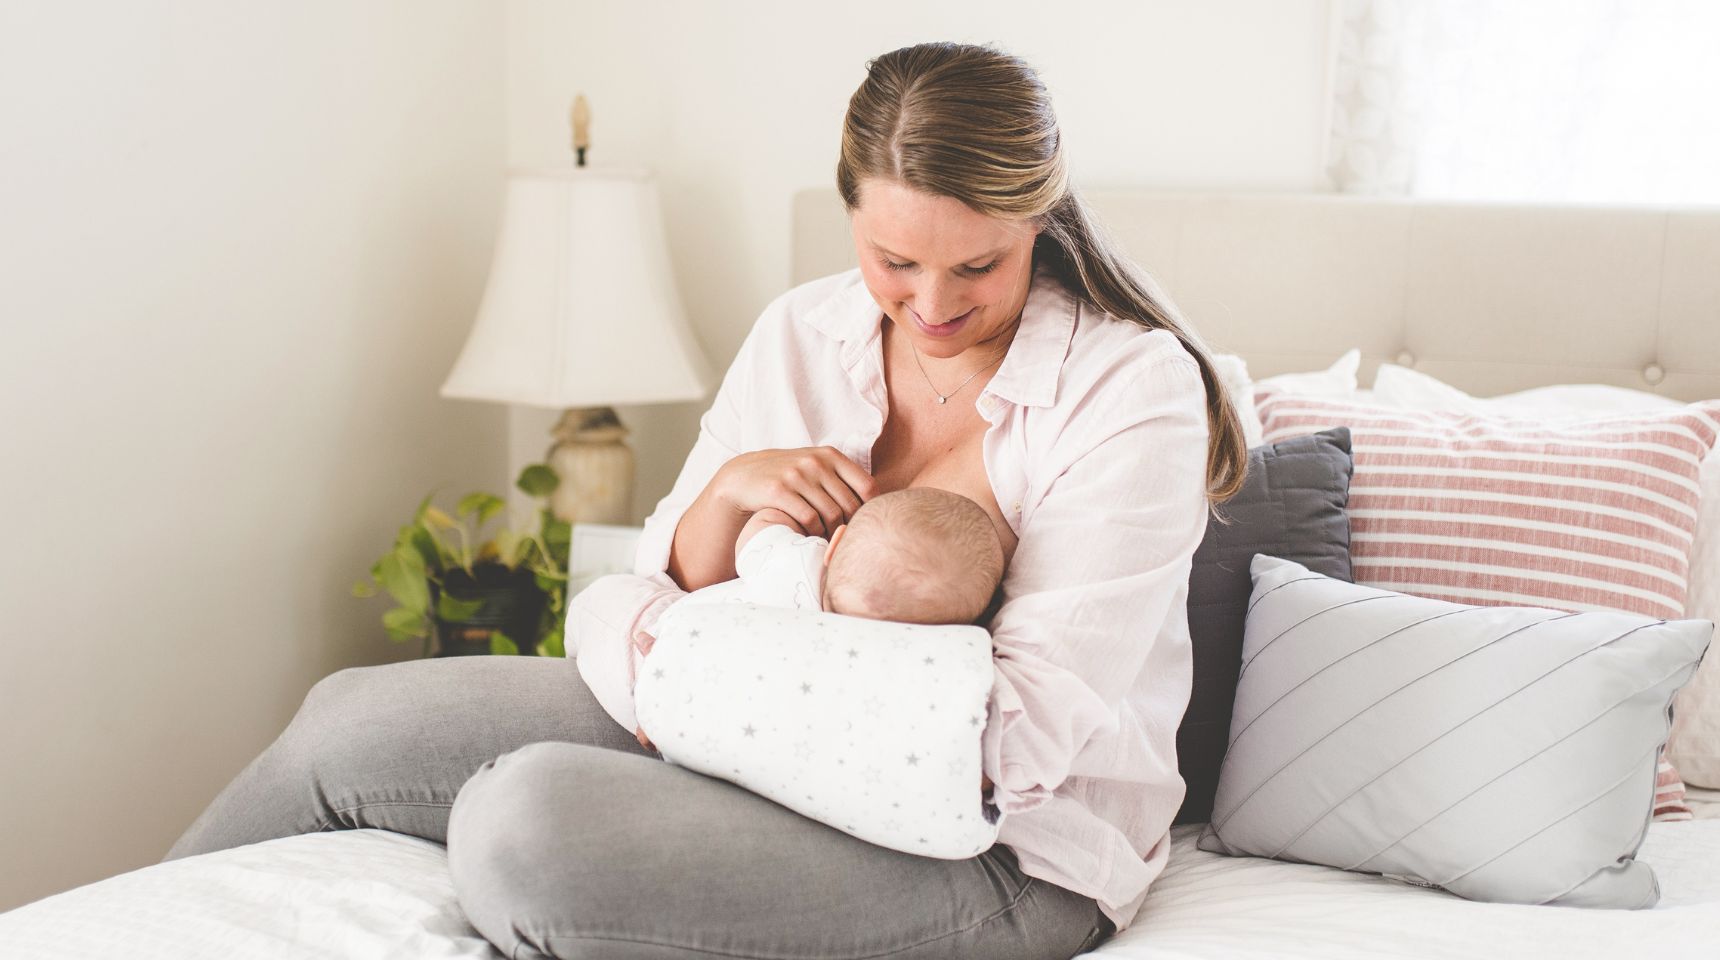 Welcome to the Third Trimester - Breastfeeding Needs